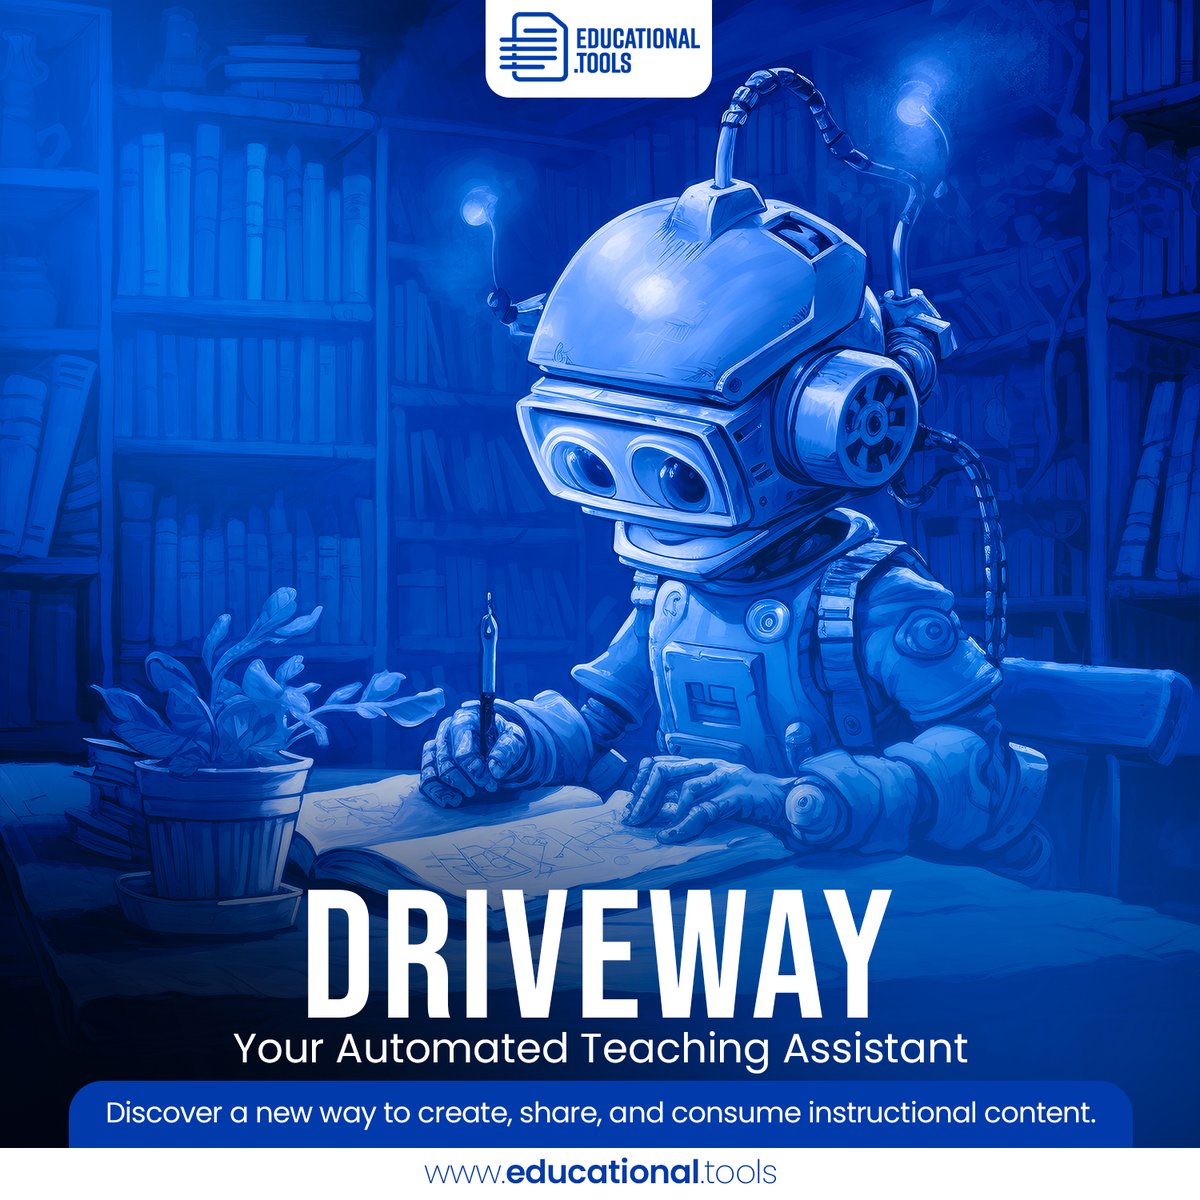 Let Driveway handle the heavy lifting—scheduling, evaluations, & more. Invest in automation to empower yourself & inspire your pupils. Join us for this transformative experience!
Know more: educational.tools

#digitalpotential #educationaltools #endlesslearning